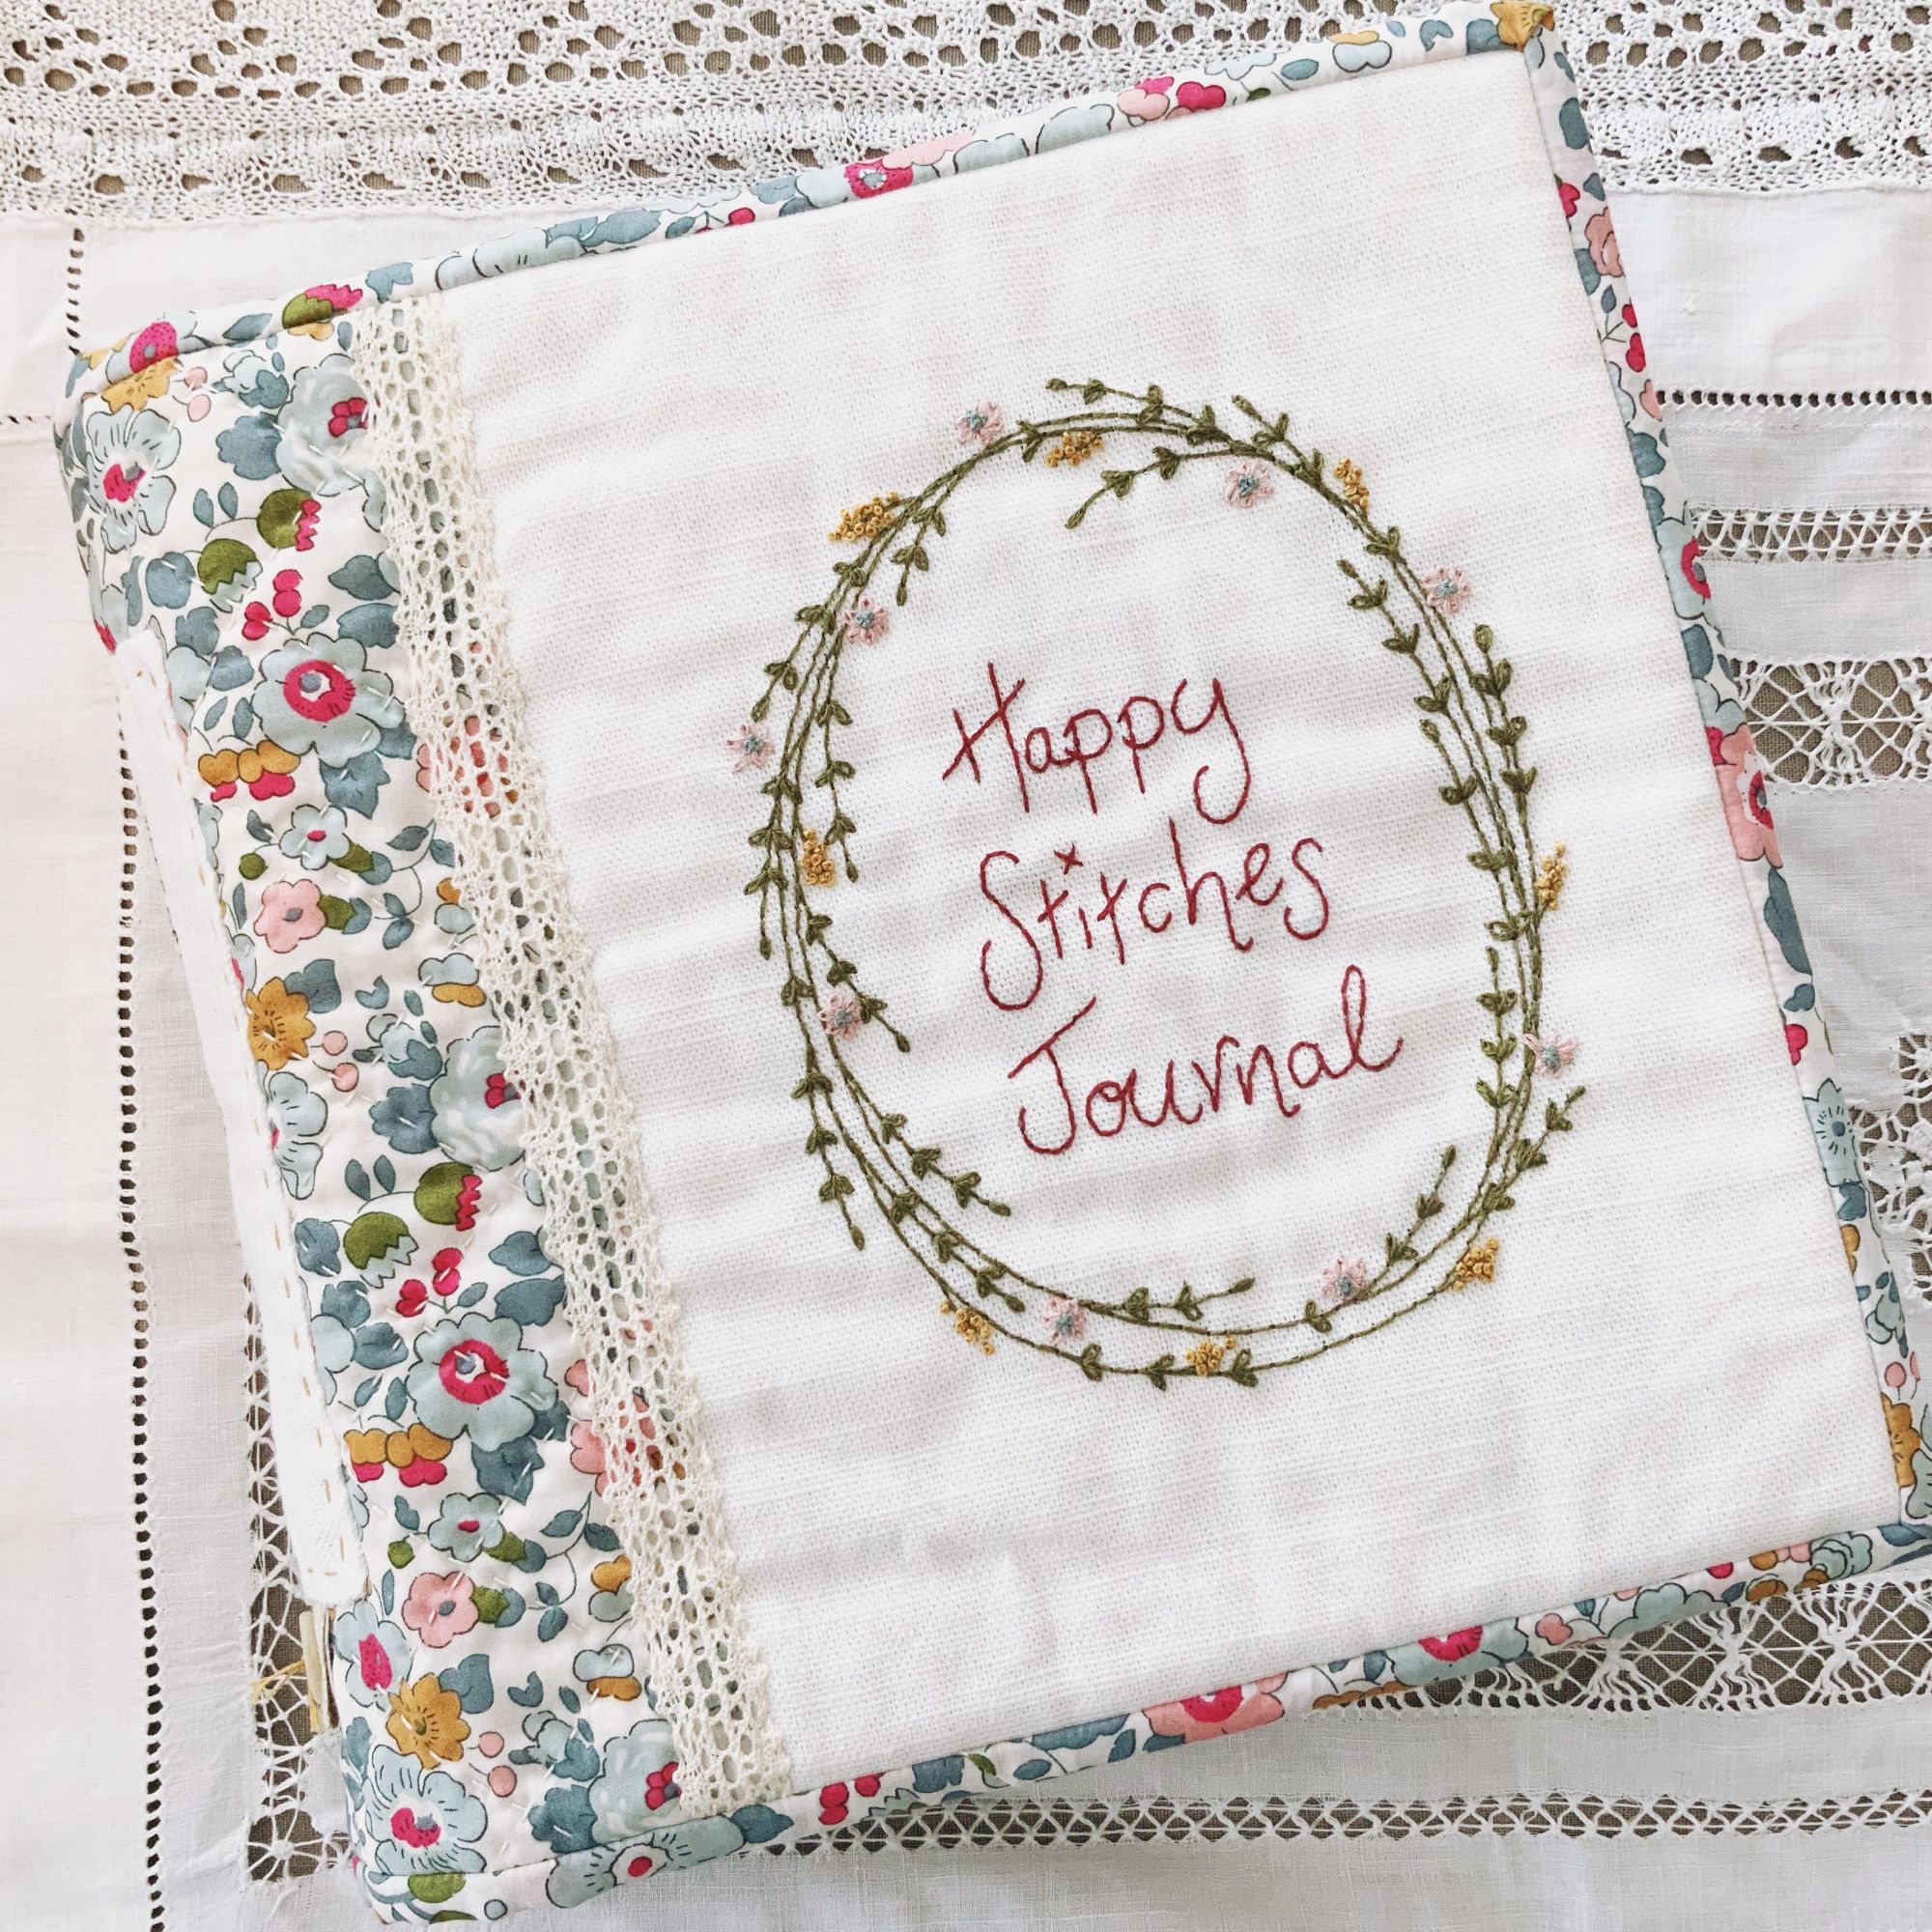 2020 Embroidery Journal — Lindsay Stitches